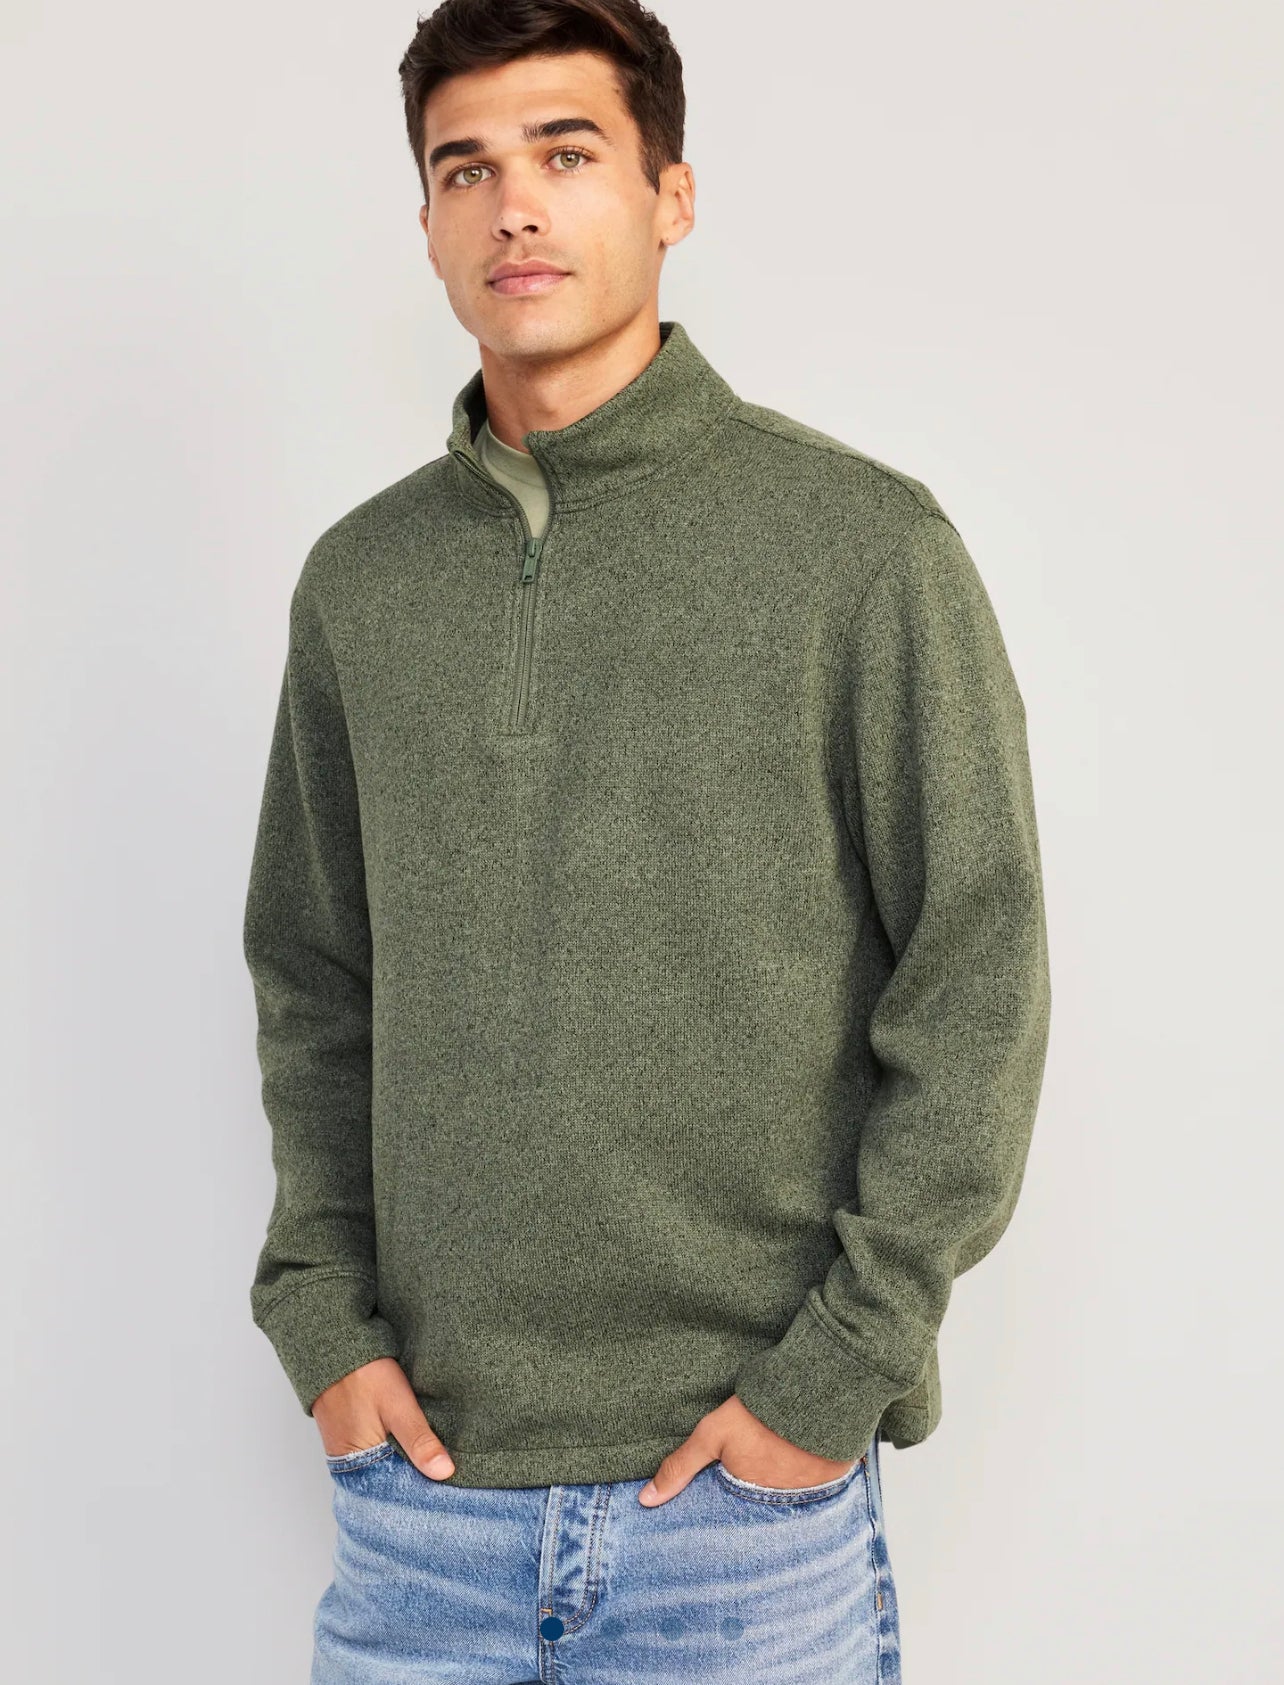 OLD NAVY original Sweater-Knit 1/4-Zip Pullover for Men – WOLF BROS